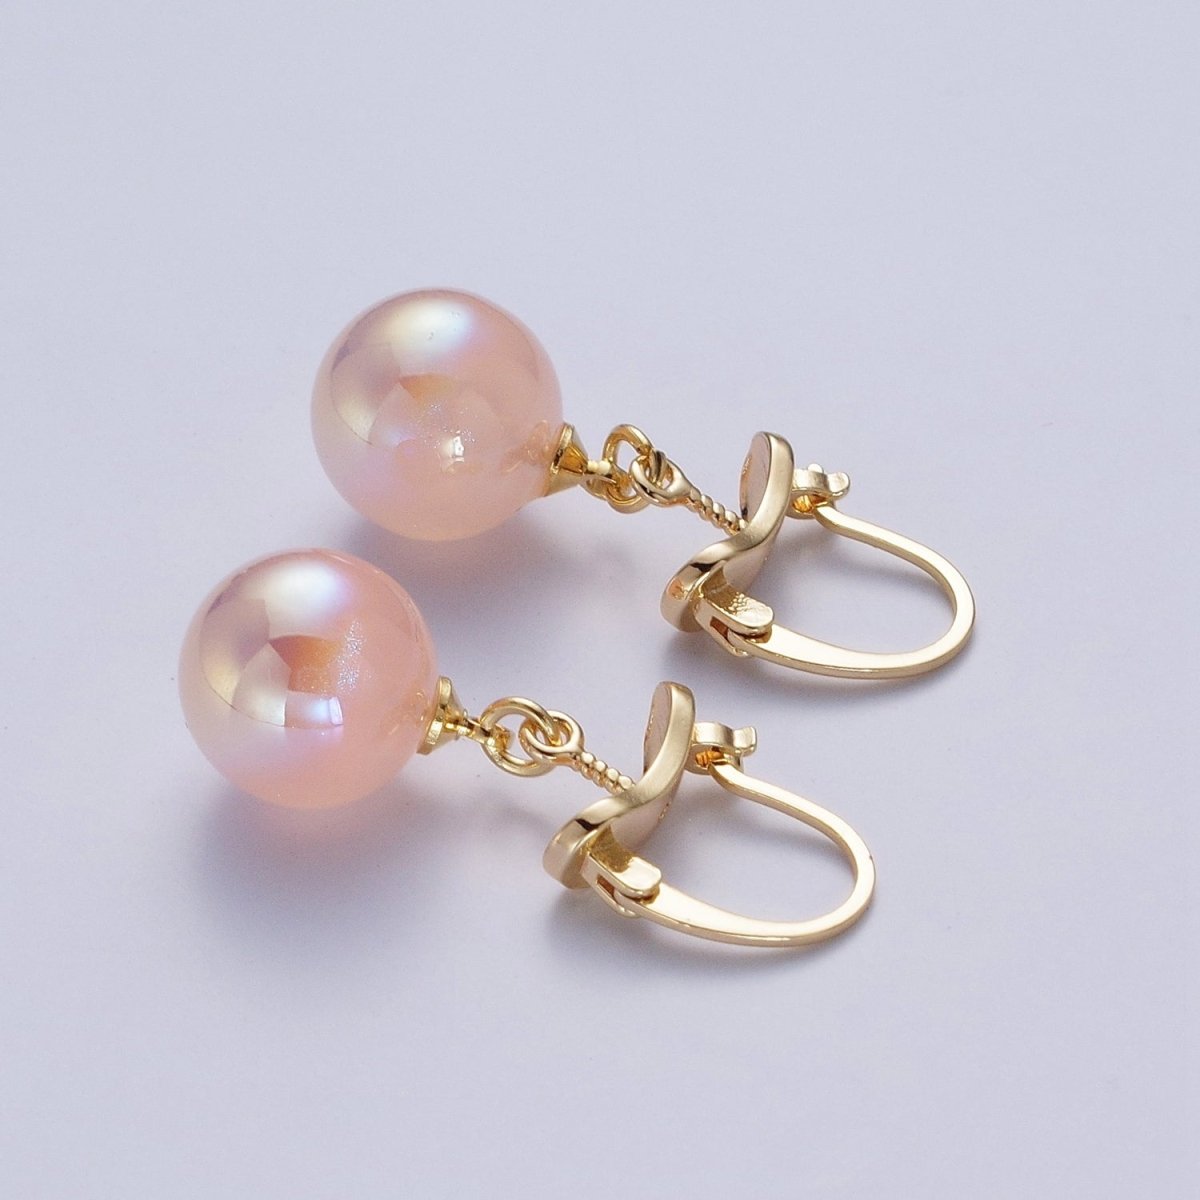 24K Gold Filled Leverback Earrings Small Hoop Earrings with Round Ball Pastel AB Color Drop Q-204 Q-216 Q-272 Q-277 Q-318 - DLUXCA